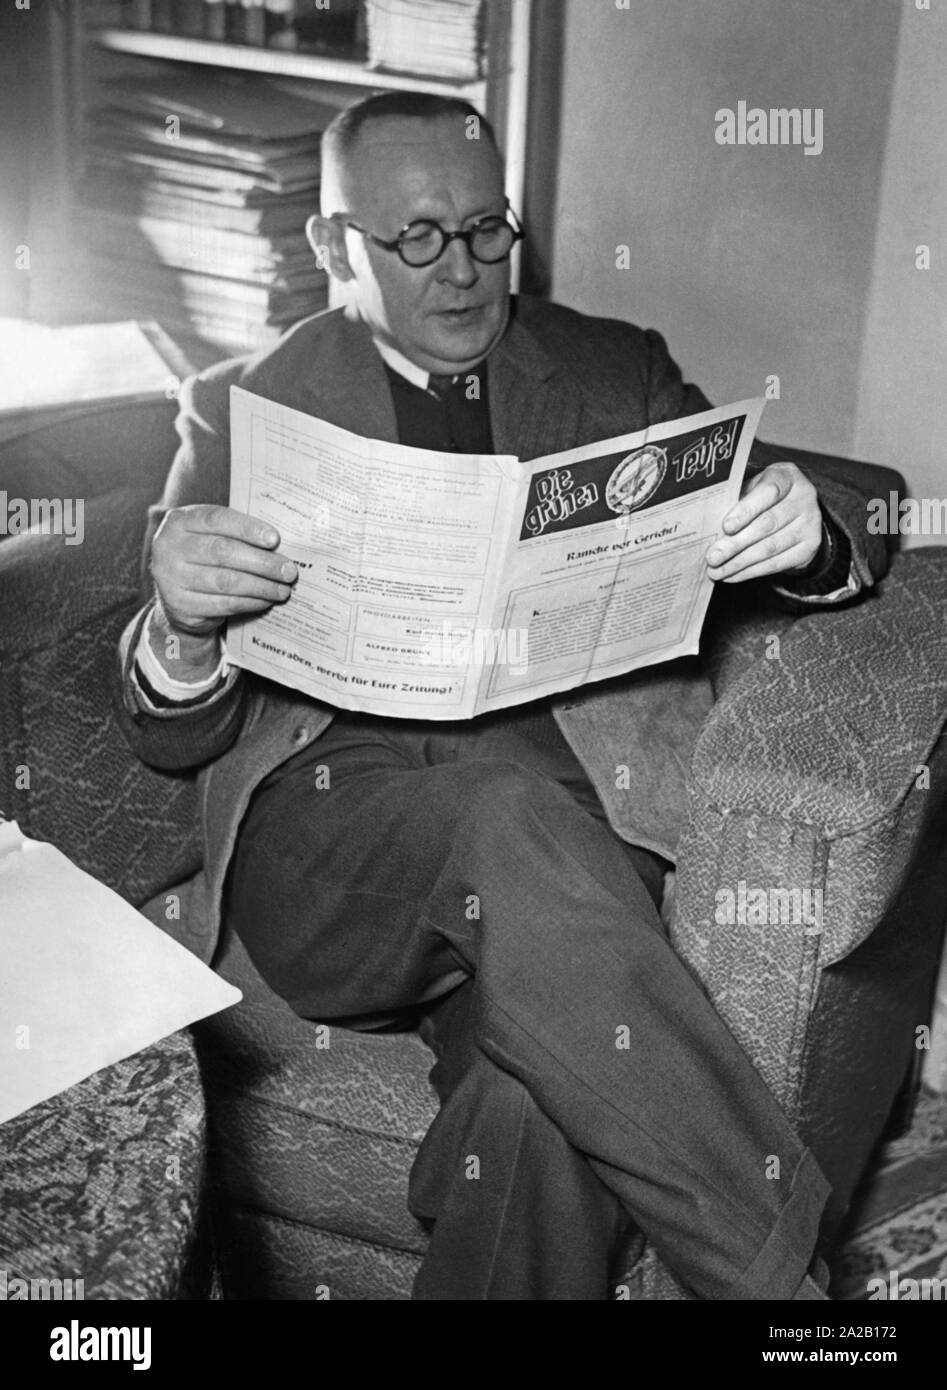 General Kurt Student after his release from captivity. Student was Colonel General of the Air Force in World War II and highest ranking general of the parachute troop of the Wehrmacht. Pictured: Student reads the monthly 'Die gruenen Teufel'. (undated photo) Stock Photo